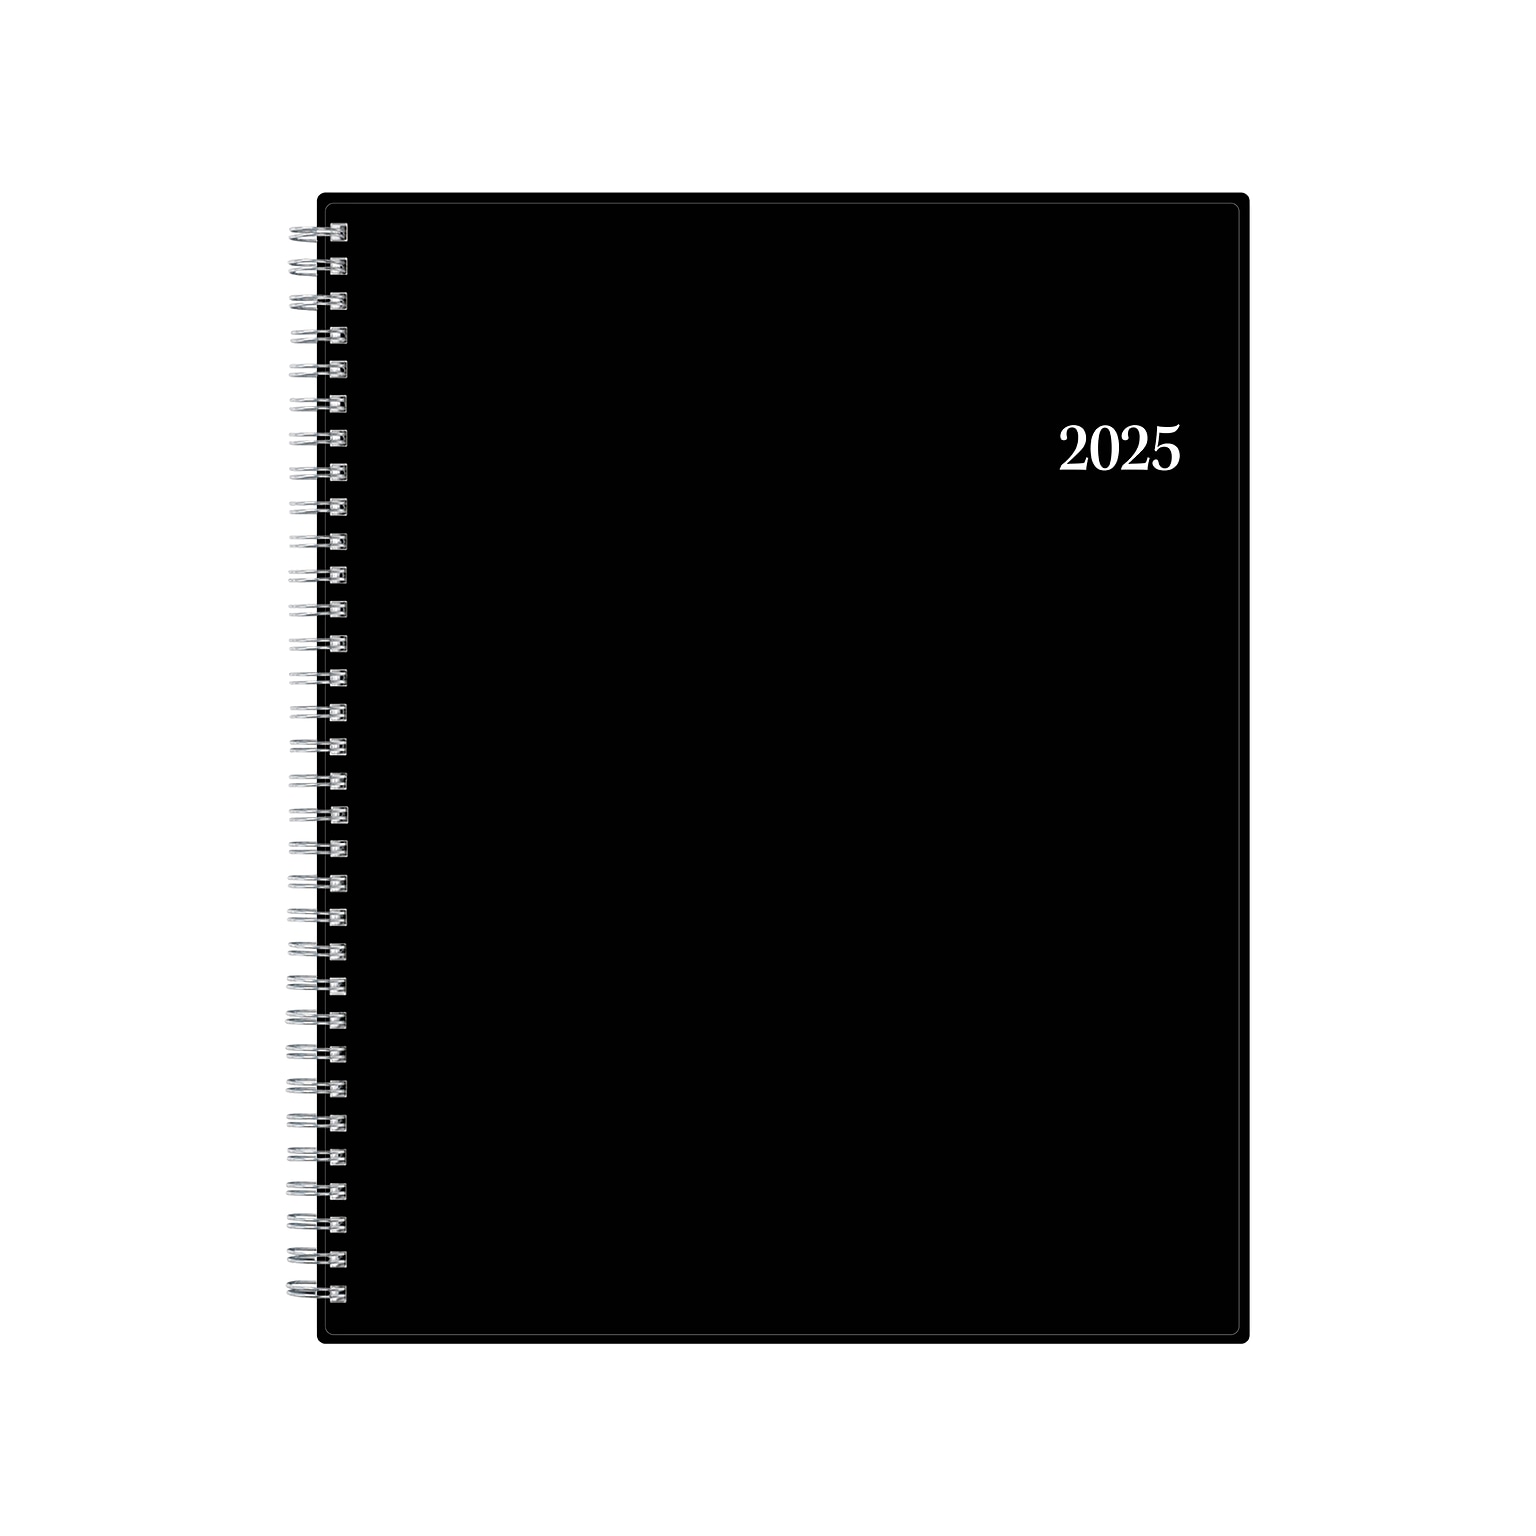 2025 Blue Sky Enterprise 8.5 x 11 Weekly & Monthly Appointment Book, Plastic Cover, Black (111289-25)